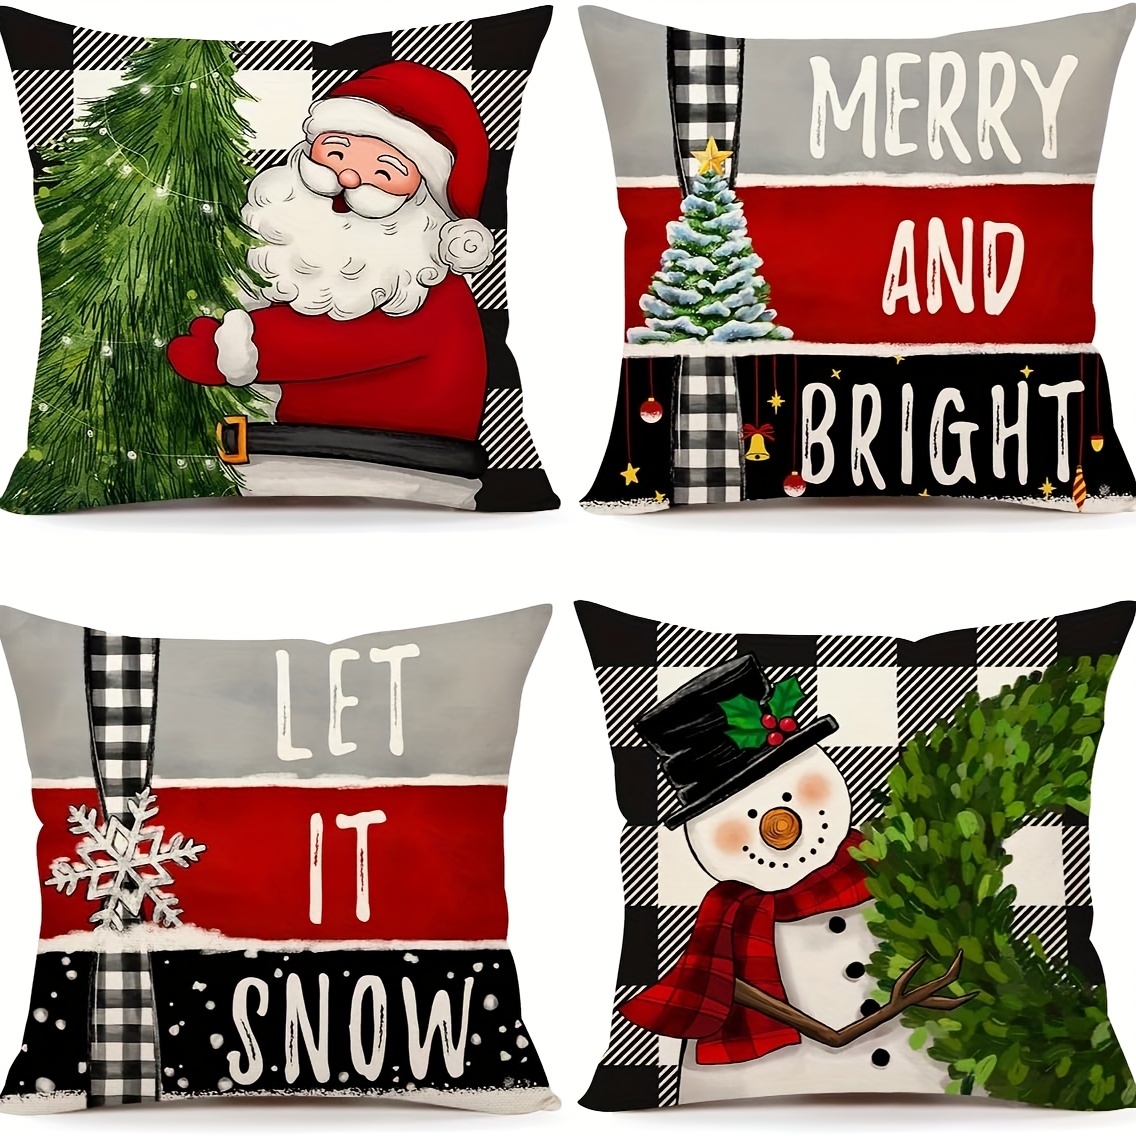 Christmas Pillow Covers 45x45cm Set Of 4 For Christmas Decorations Green  Buffalo Plaid Grinch Christmas Pillows Winter Holiday Throw Pillows  Christmas